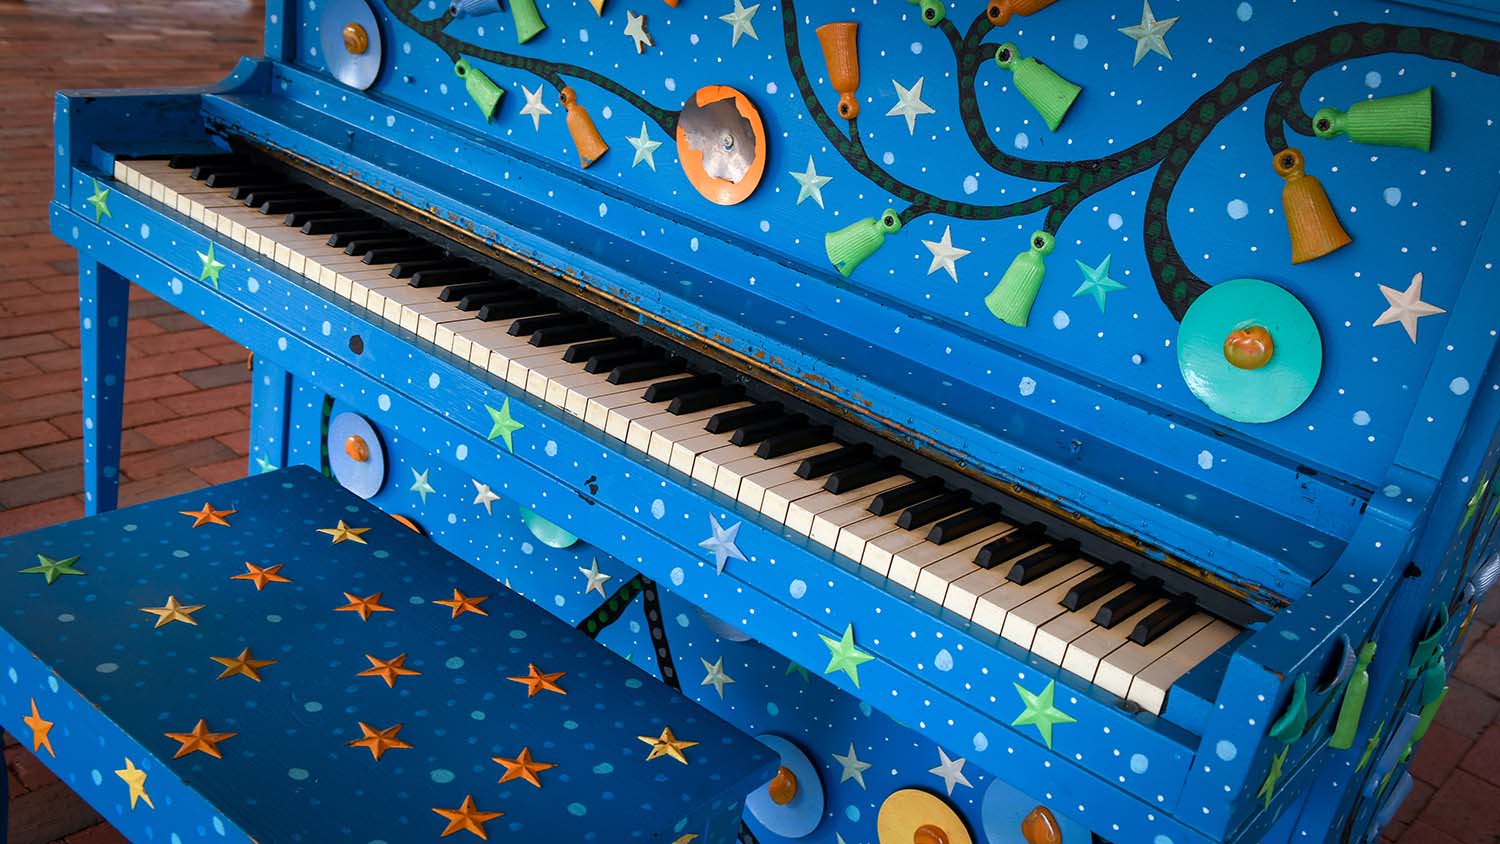 A piano painted cobalt blue and decorated with stars, located on The Corner's main stage.